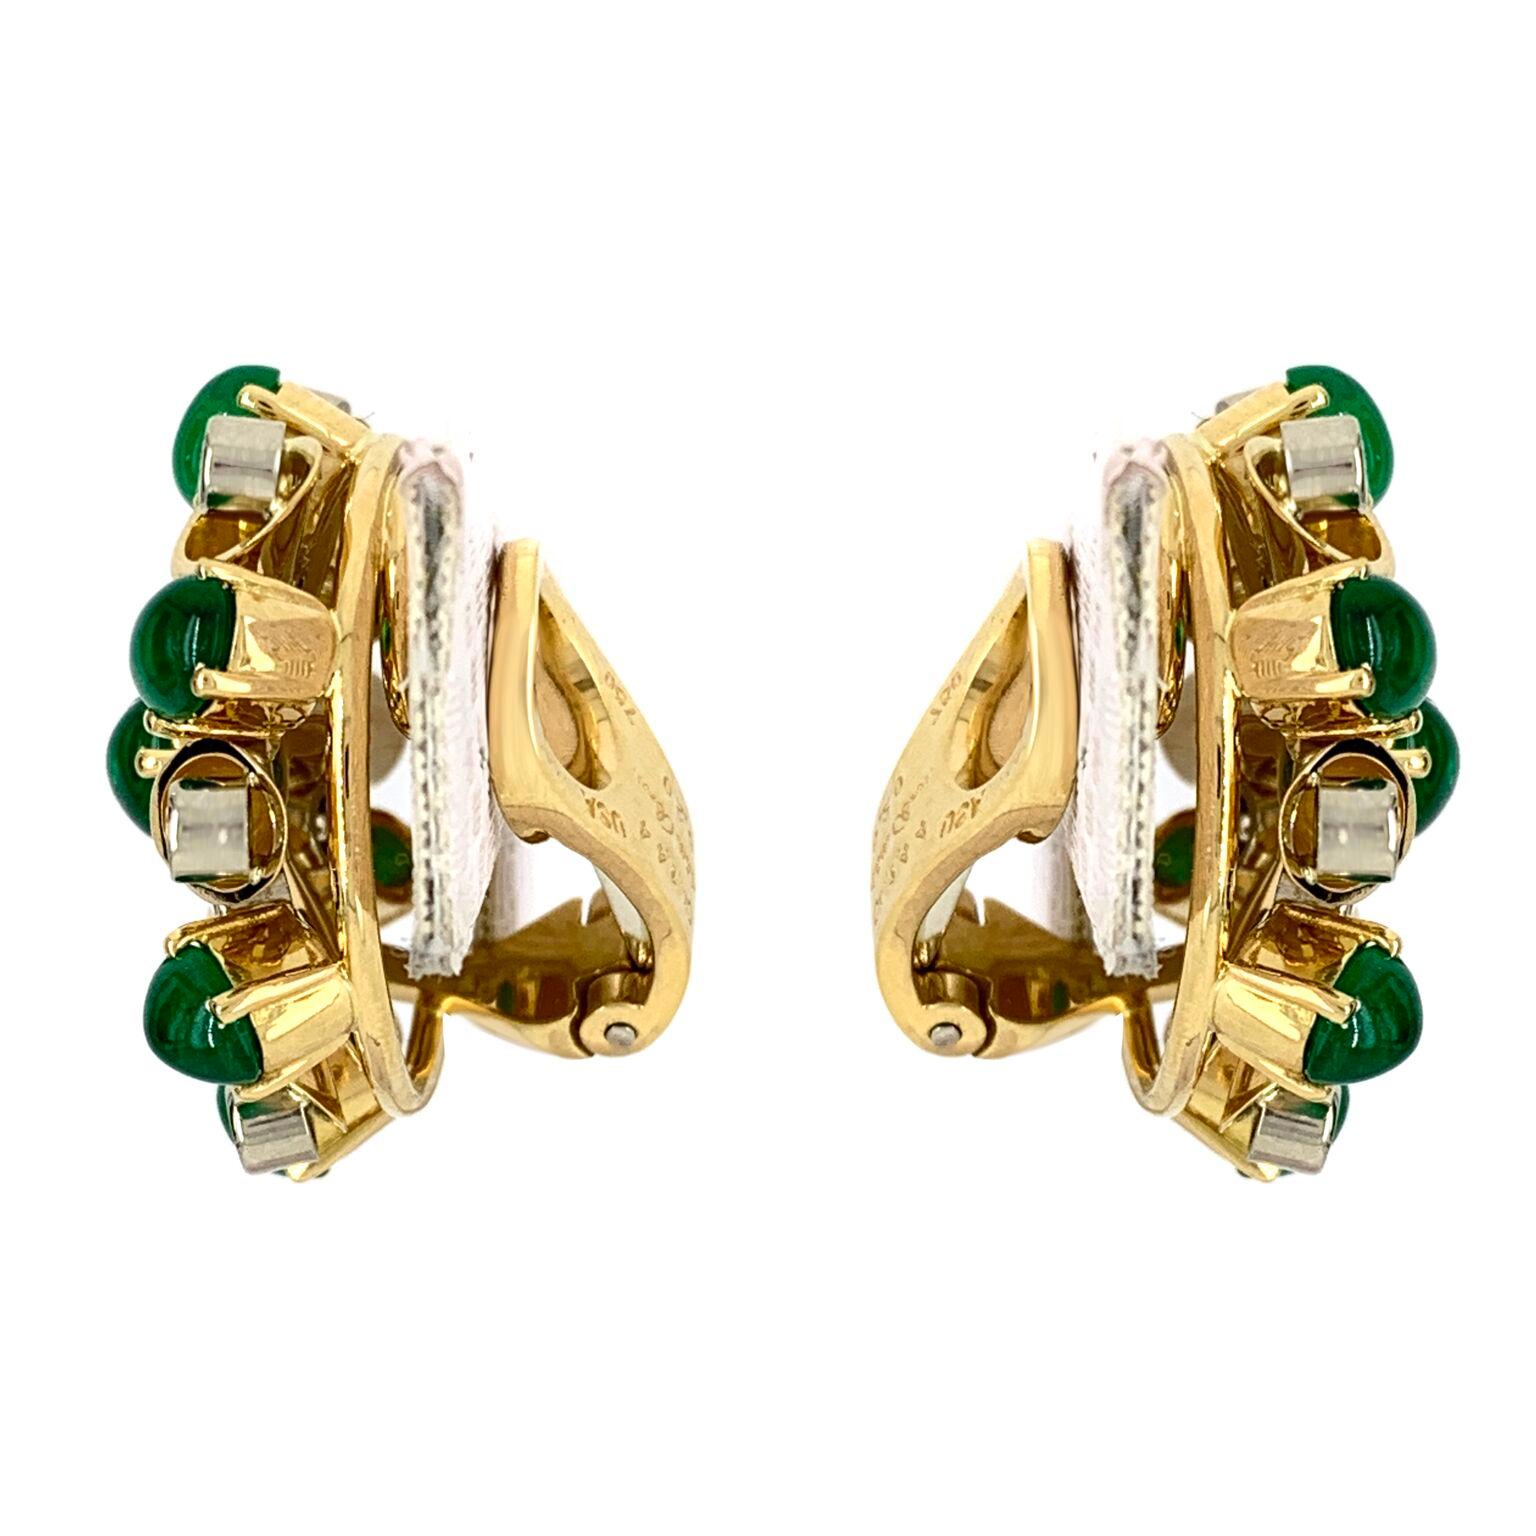 Material: Yellow Gold
Hallmark: Ct.1.44  USA Aletto Bros 6.20 750
Gemstone: 6 CT 20 of Emerald and 1CT 44 of Diamond
Diamond Color: E-F
Diamond Clarity: VS1-VS2
Total Weight: 40.5 grams
Condition: Excellent
Item No: 549